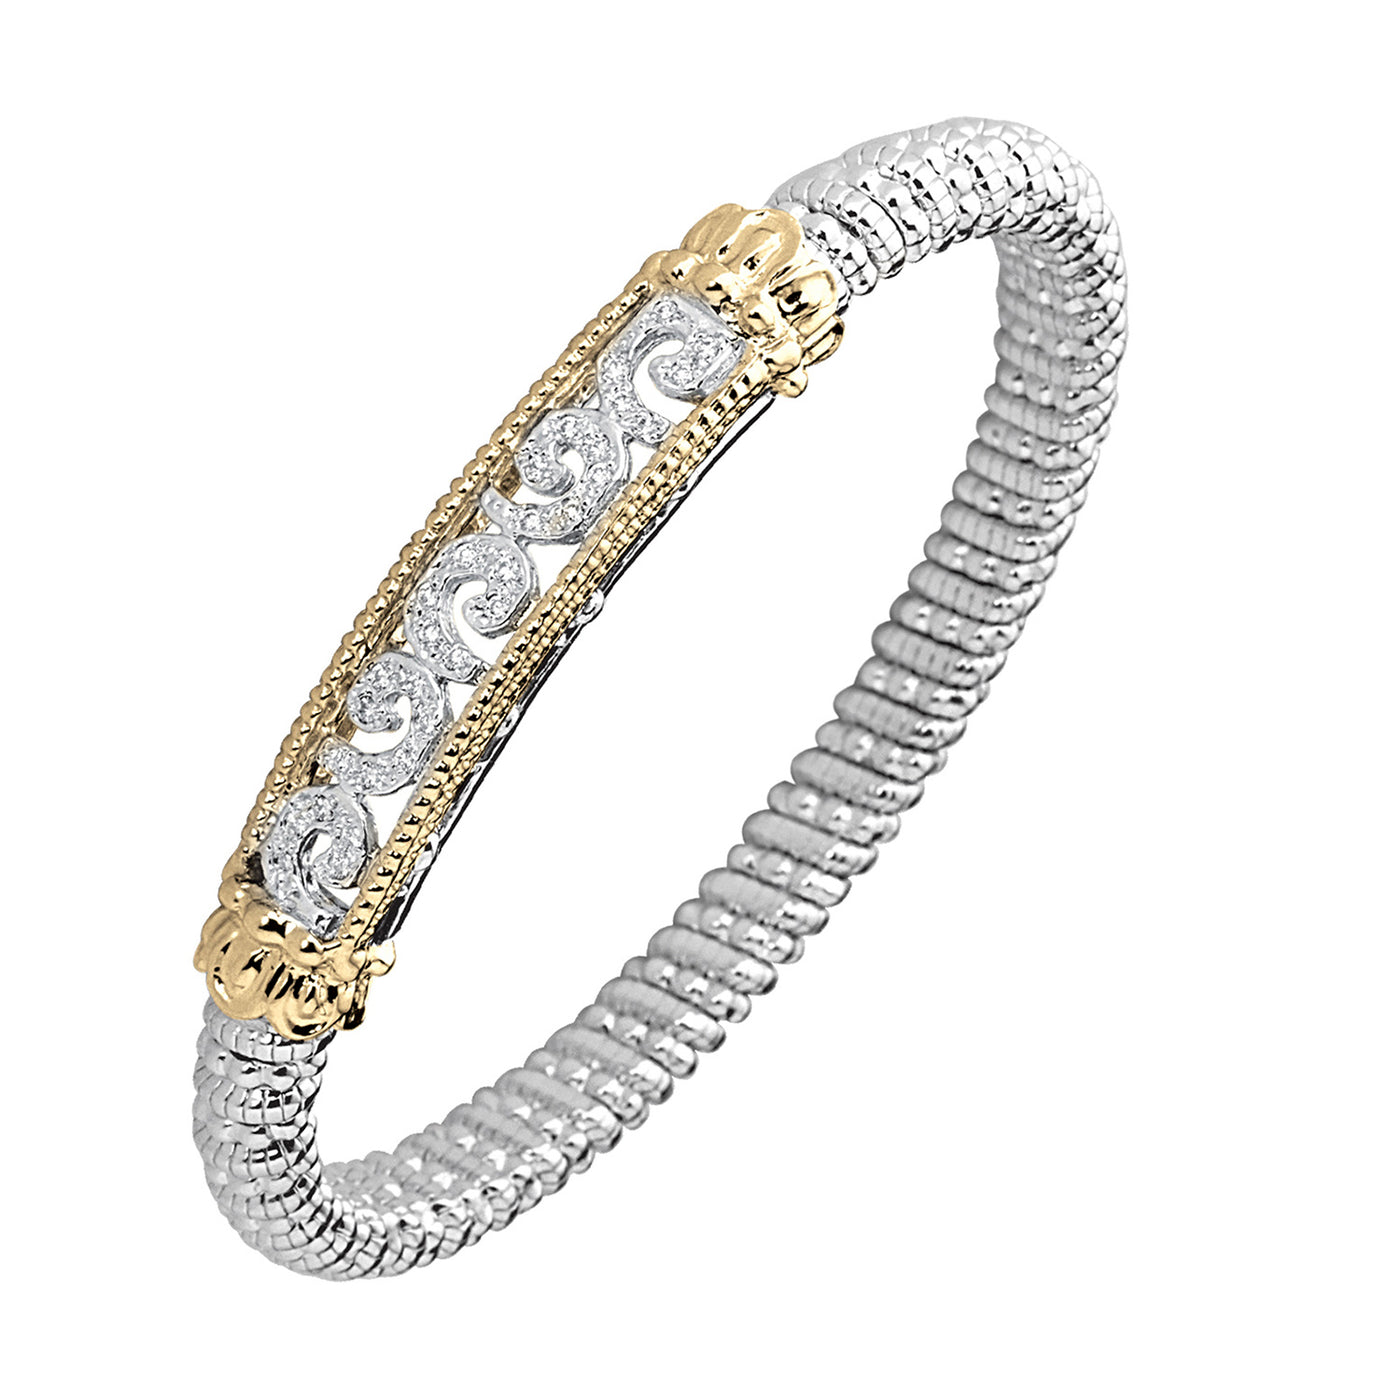 Vahan Sterling Silver and 14k Yellow Gold Moiré Beaded® Bangle Bracelet with Diamonds – 22111D